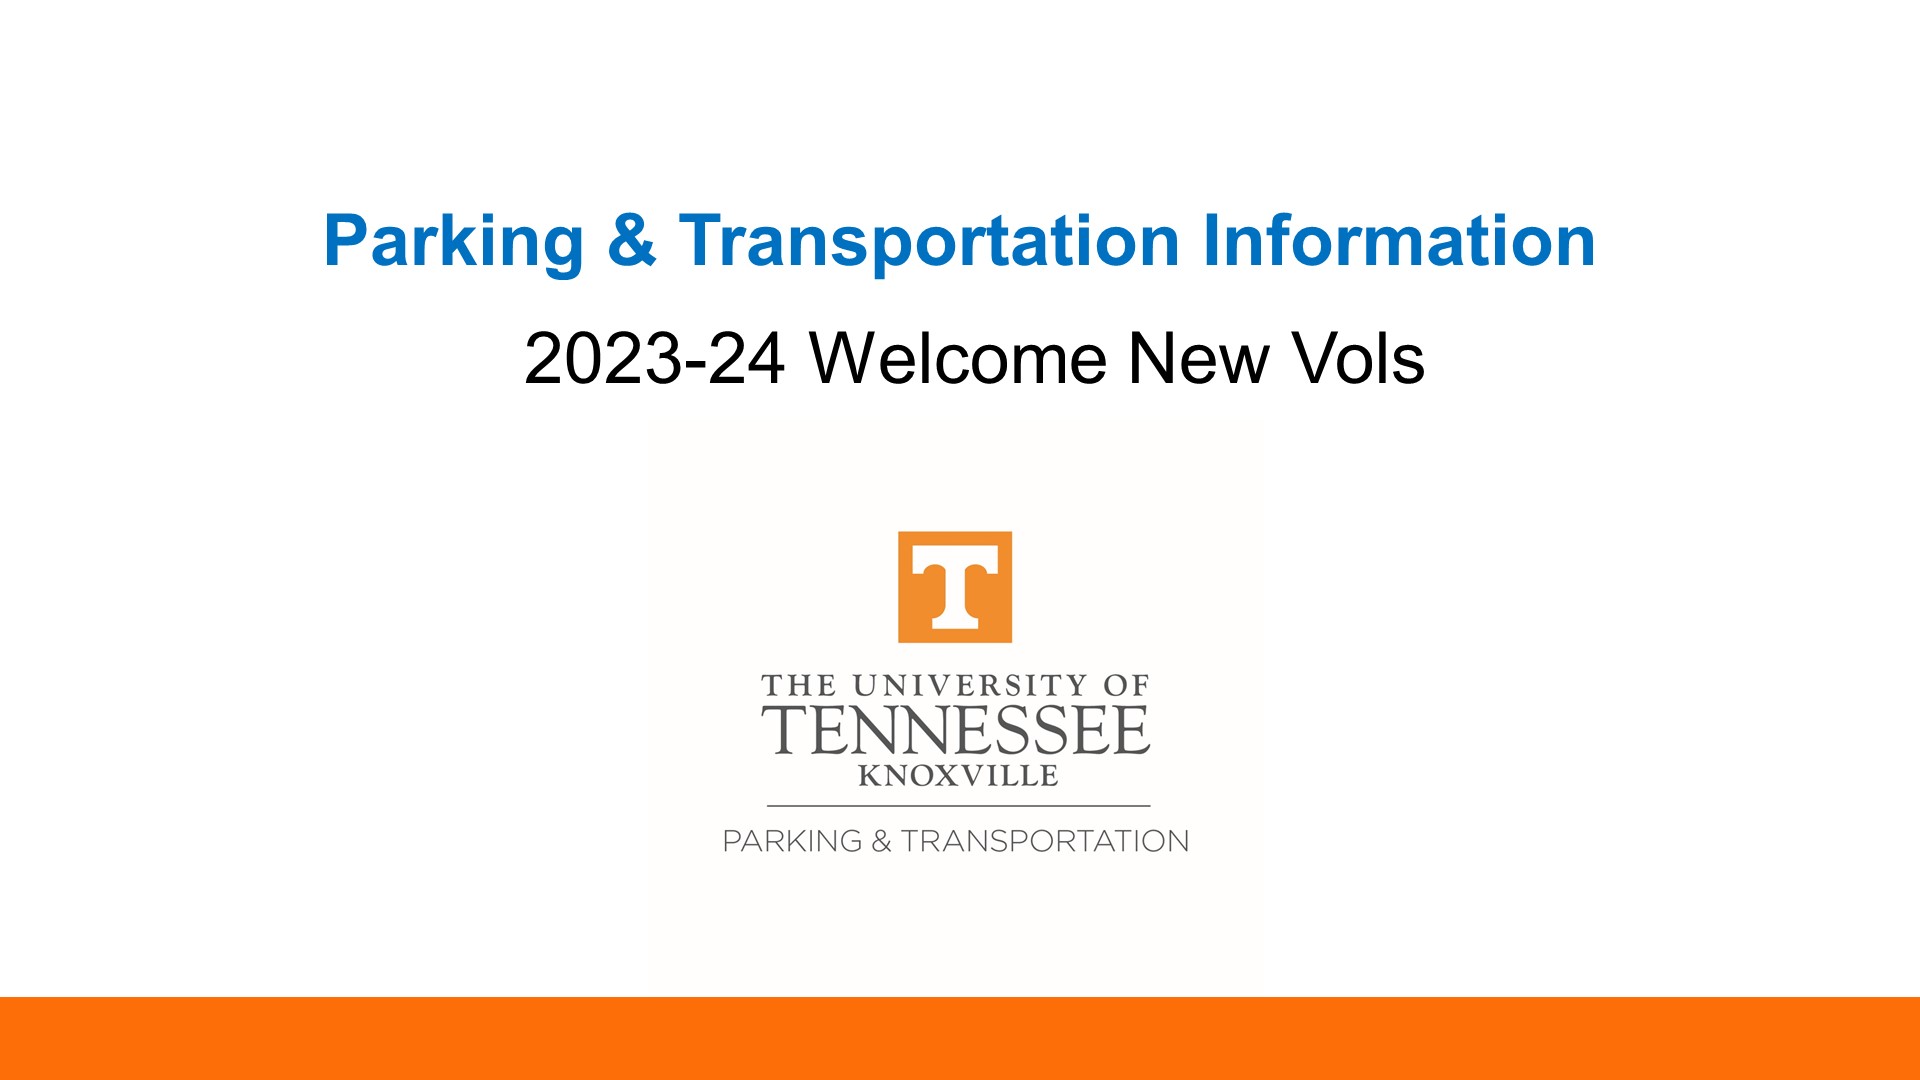 Parking and Transportation for New Vols